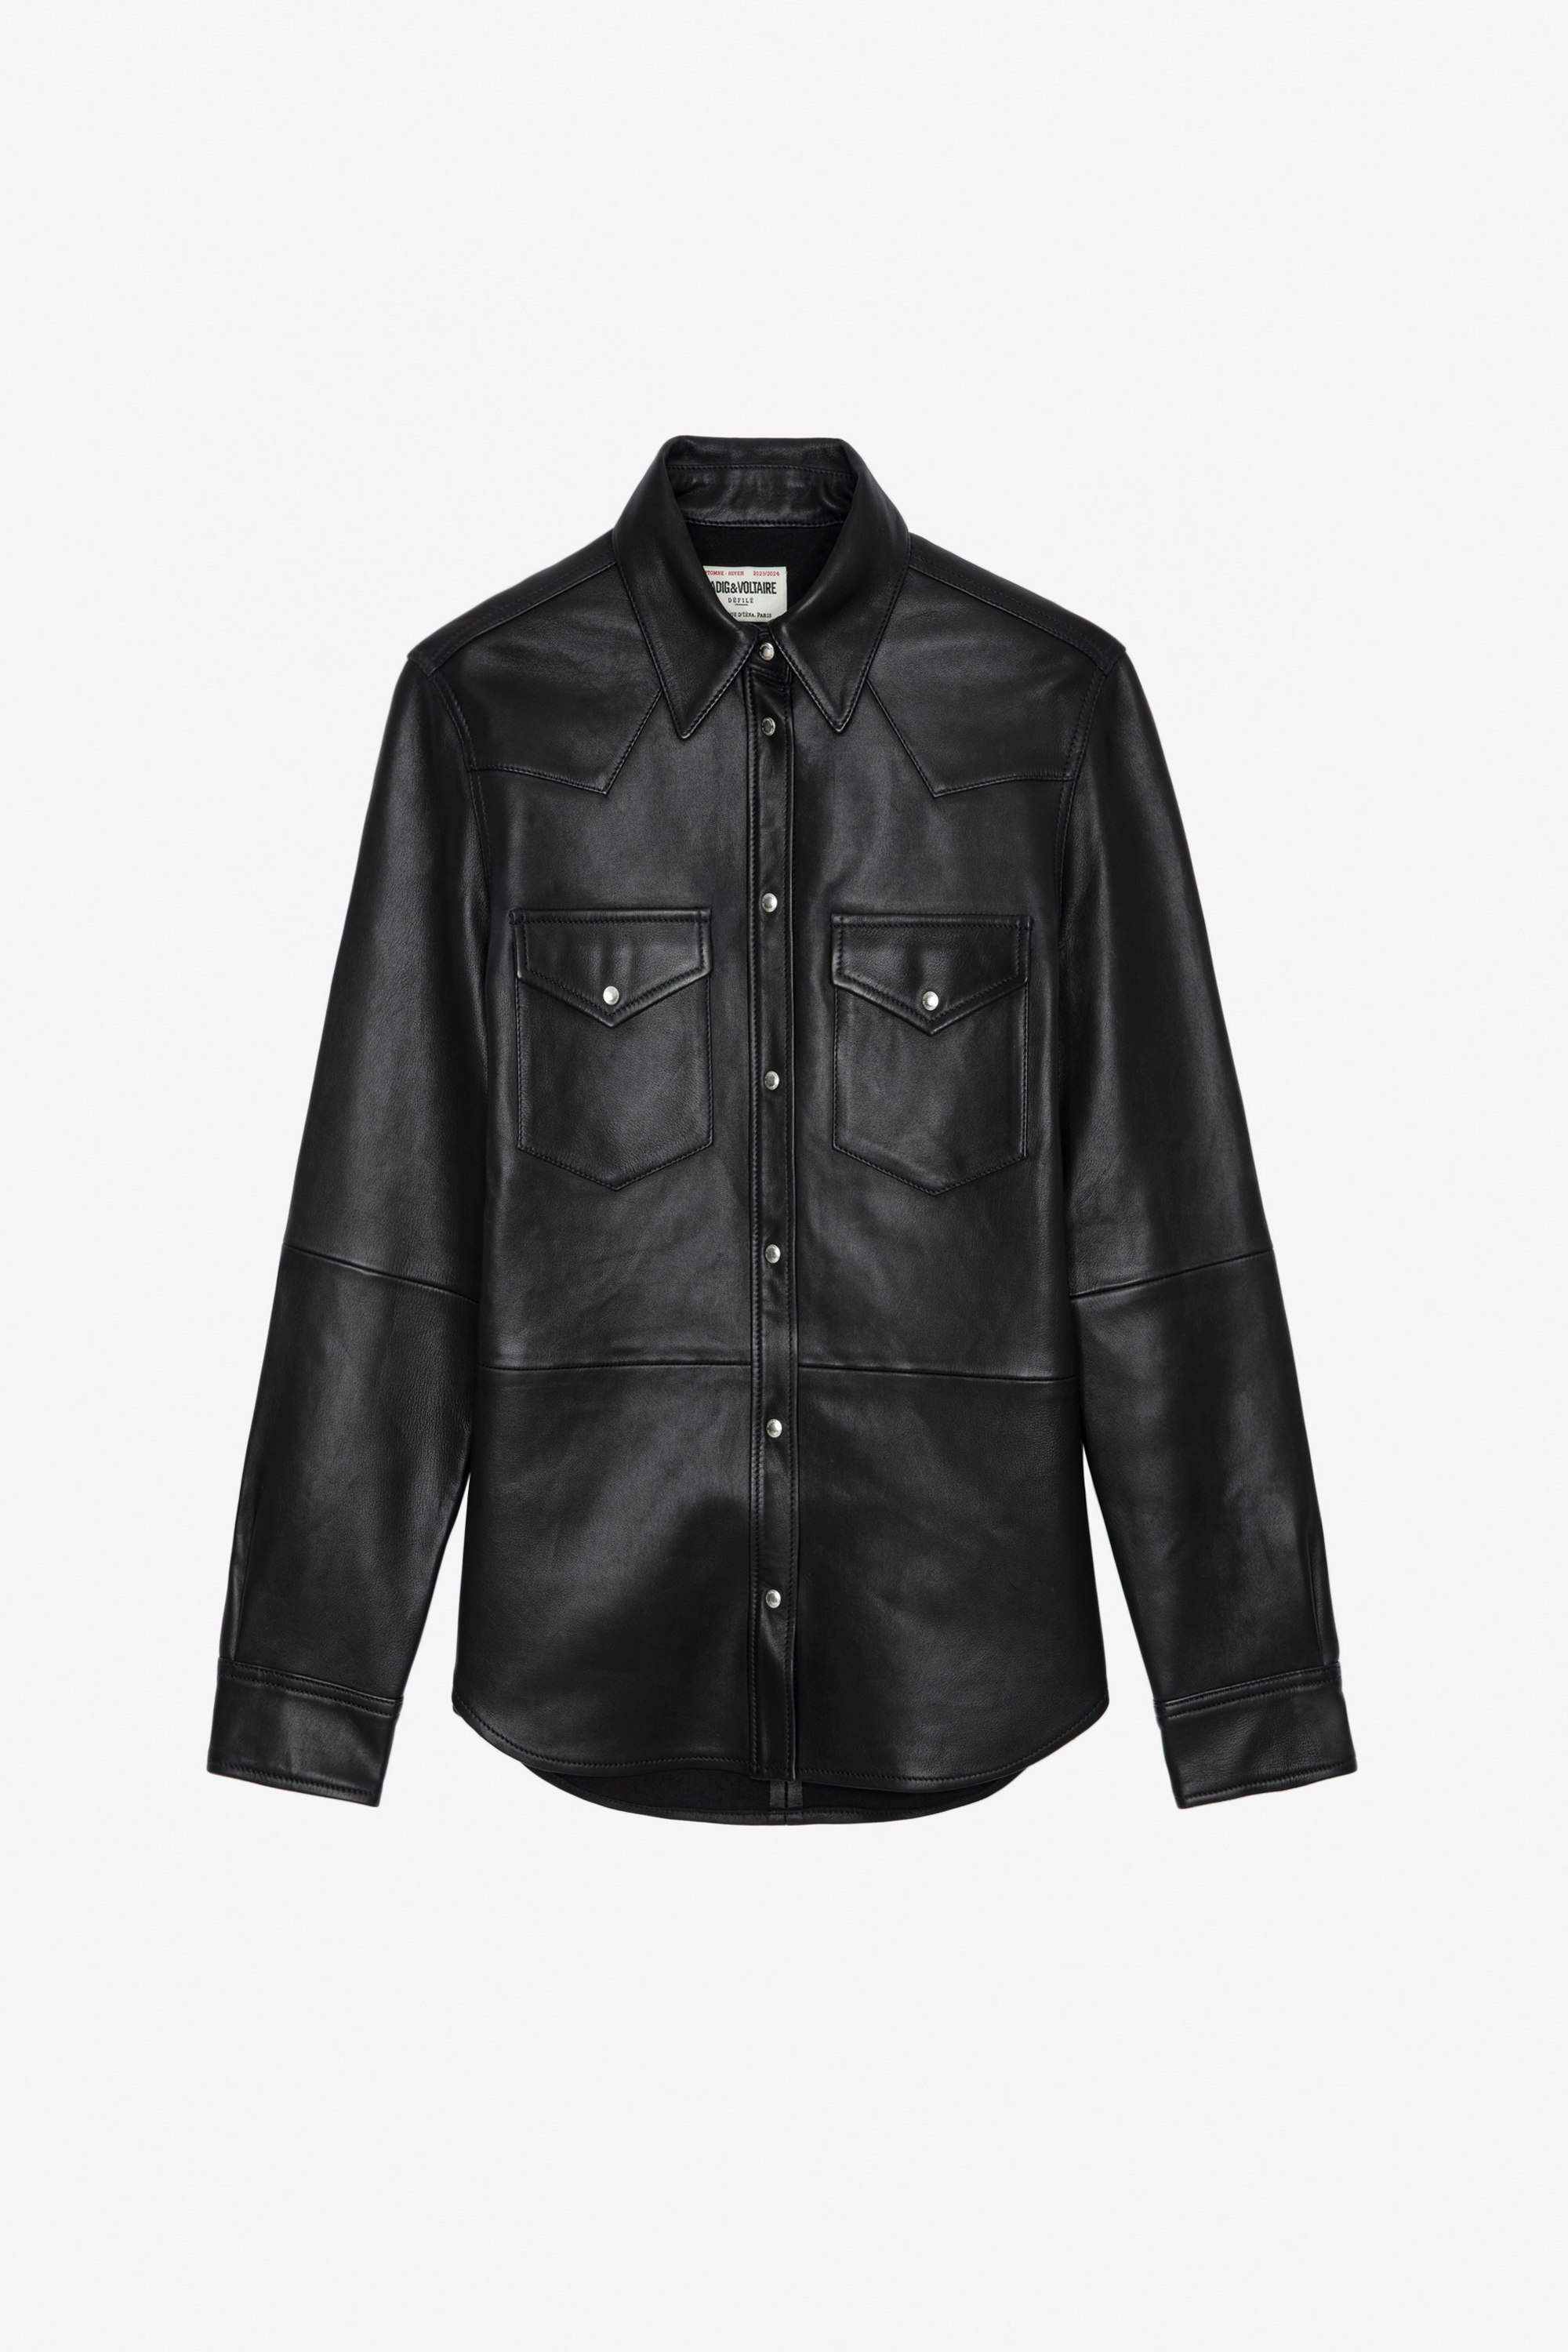 Thelma Leather Shirt - Women’s black leather shirt with pockets.